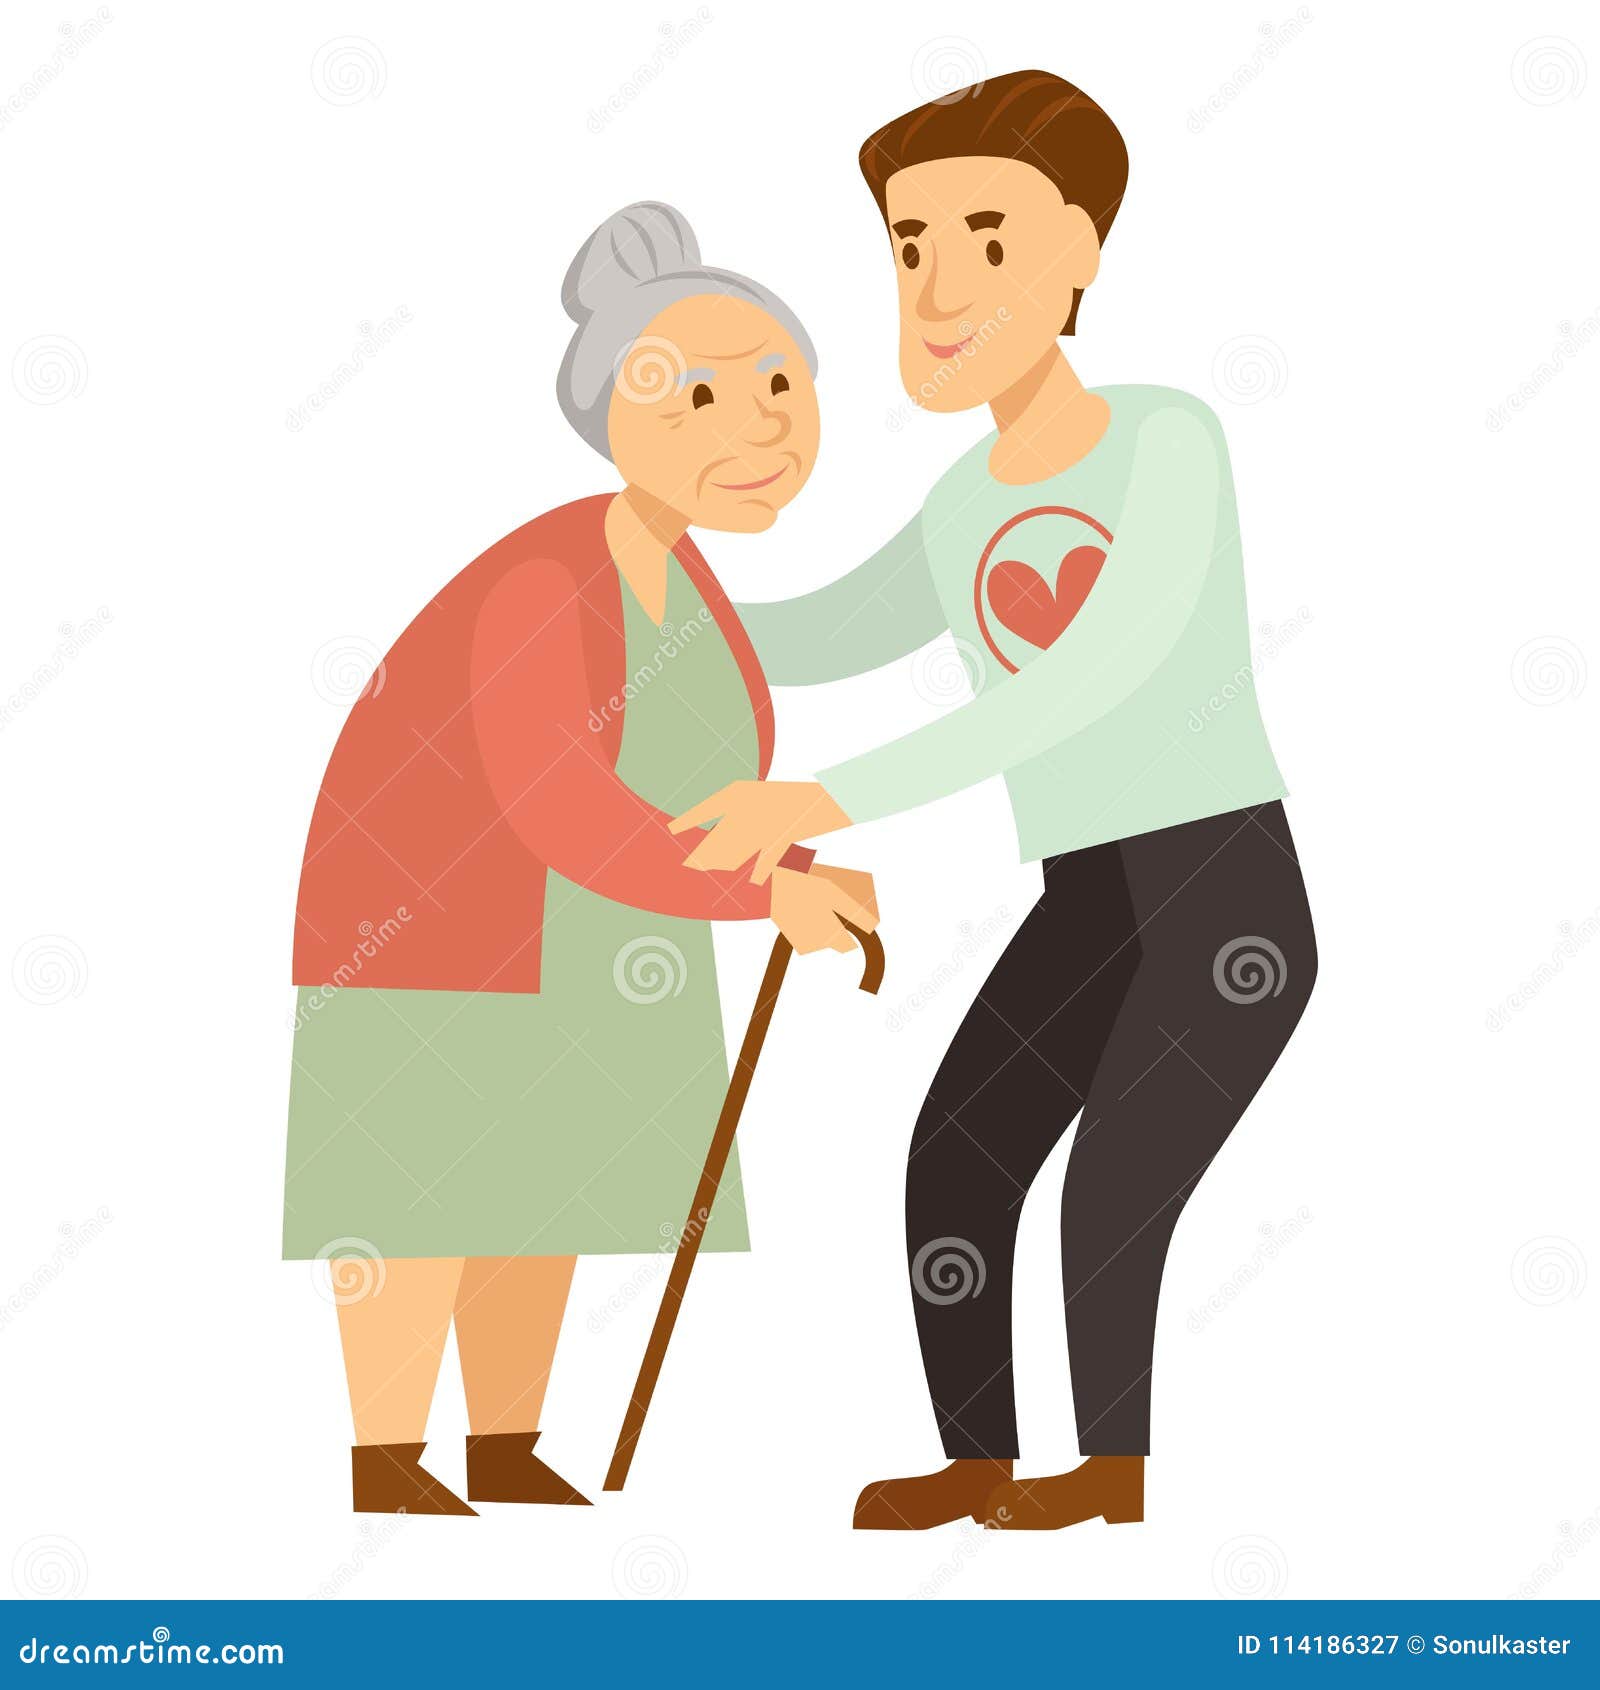 kind male volunteer helps old lady with cane